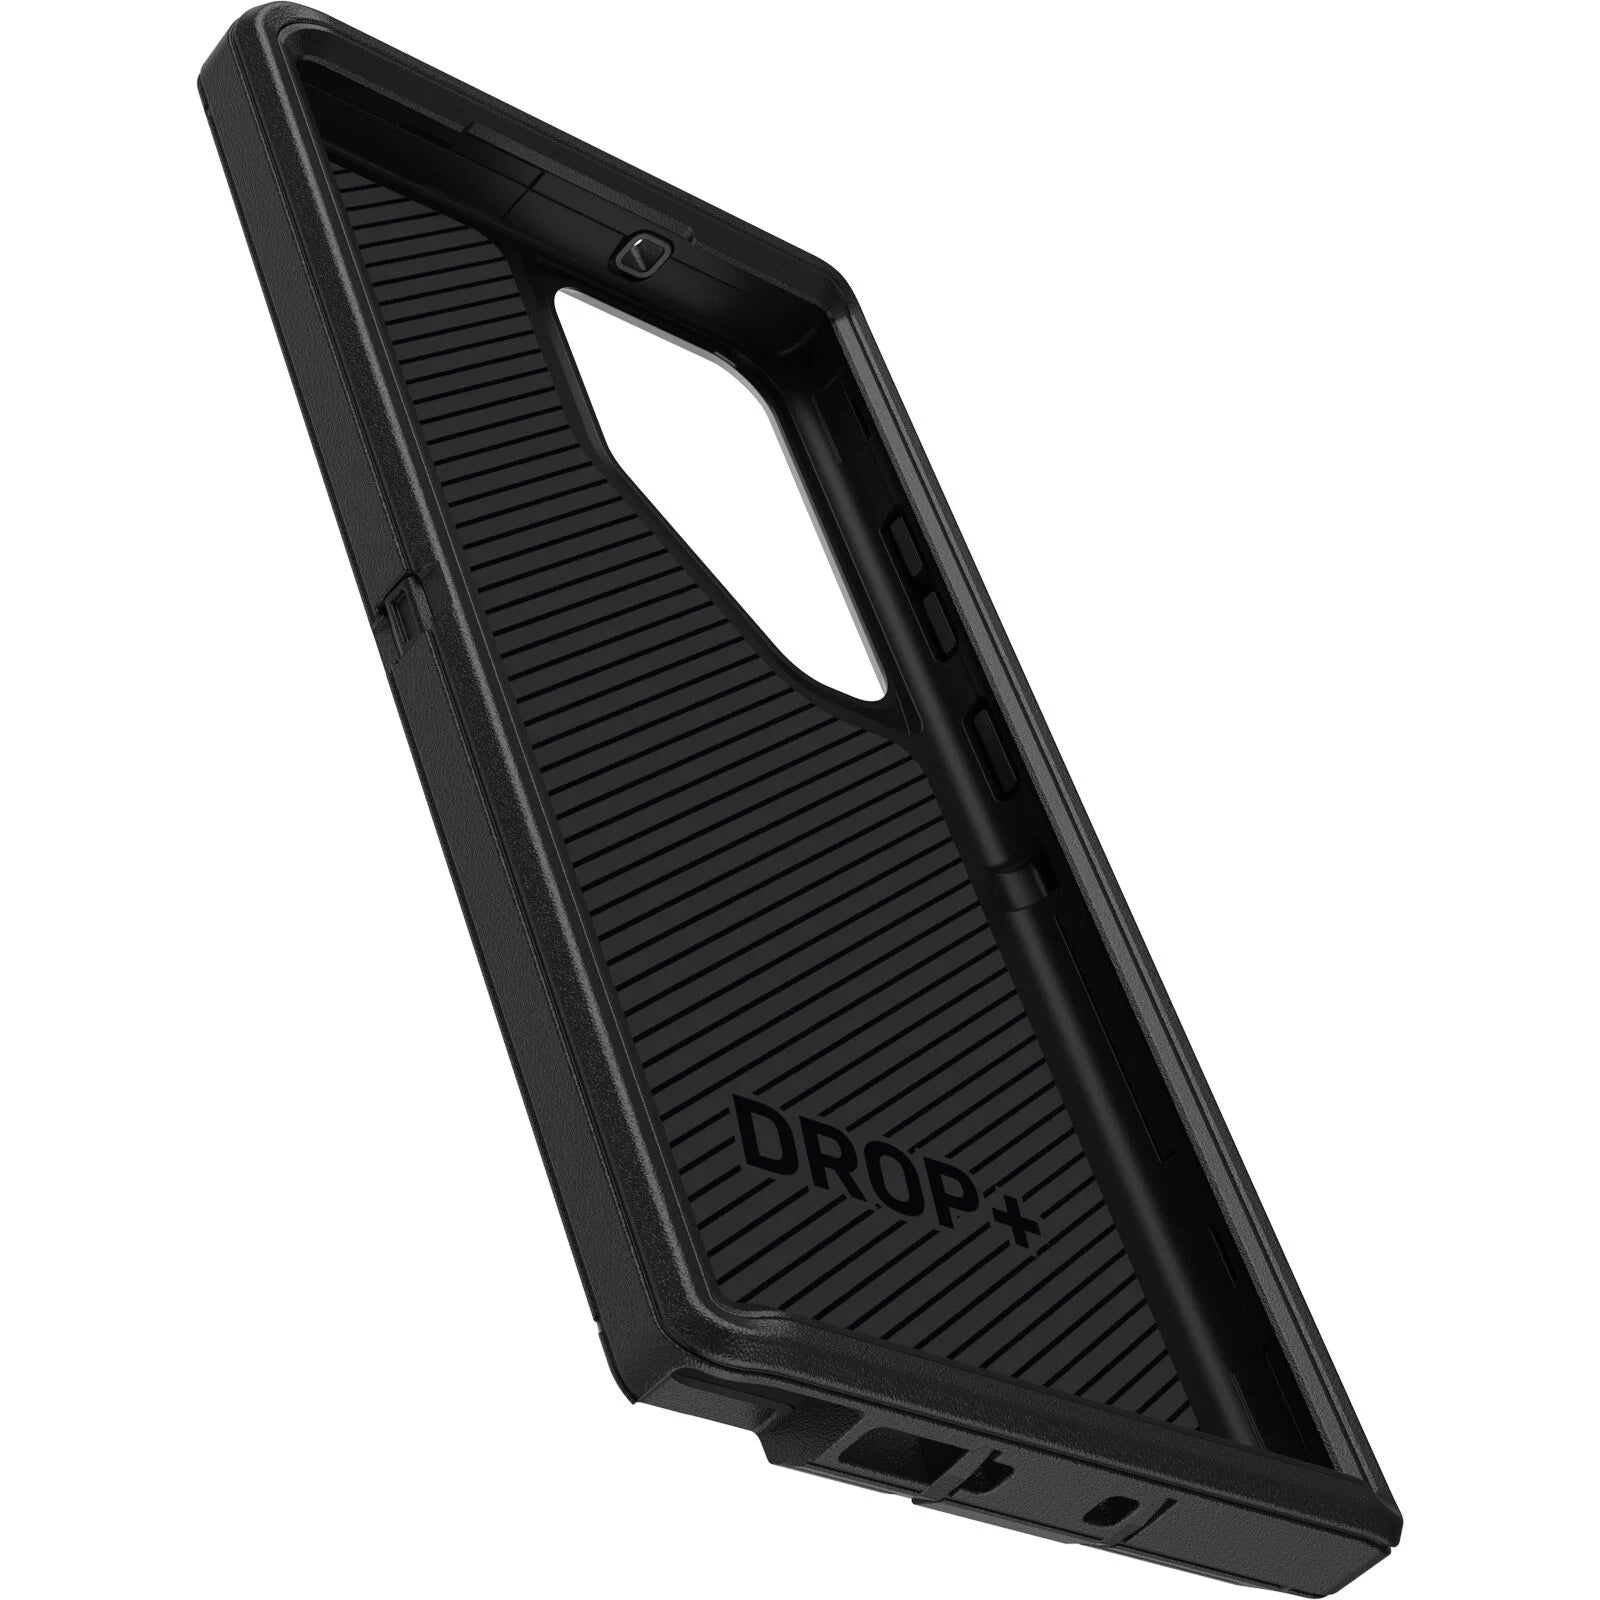 Otterbox Defender Case for Samsung Galaxy S23 Ultra